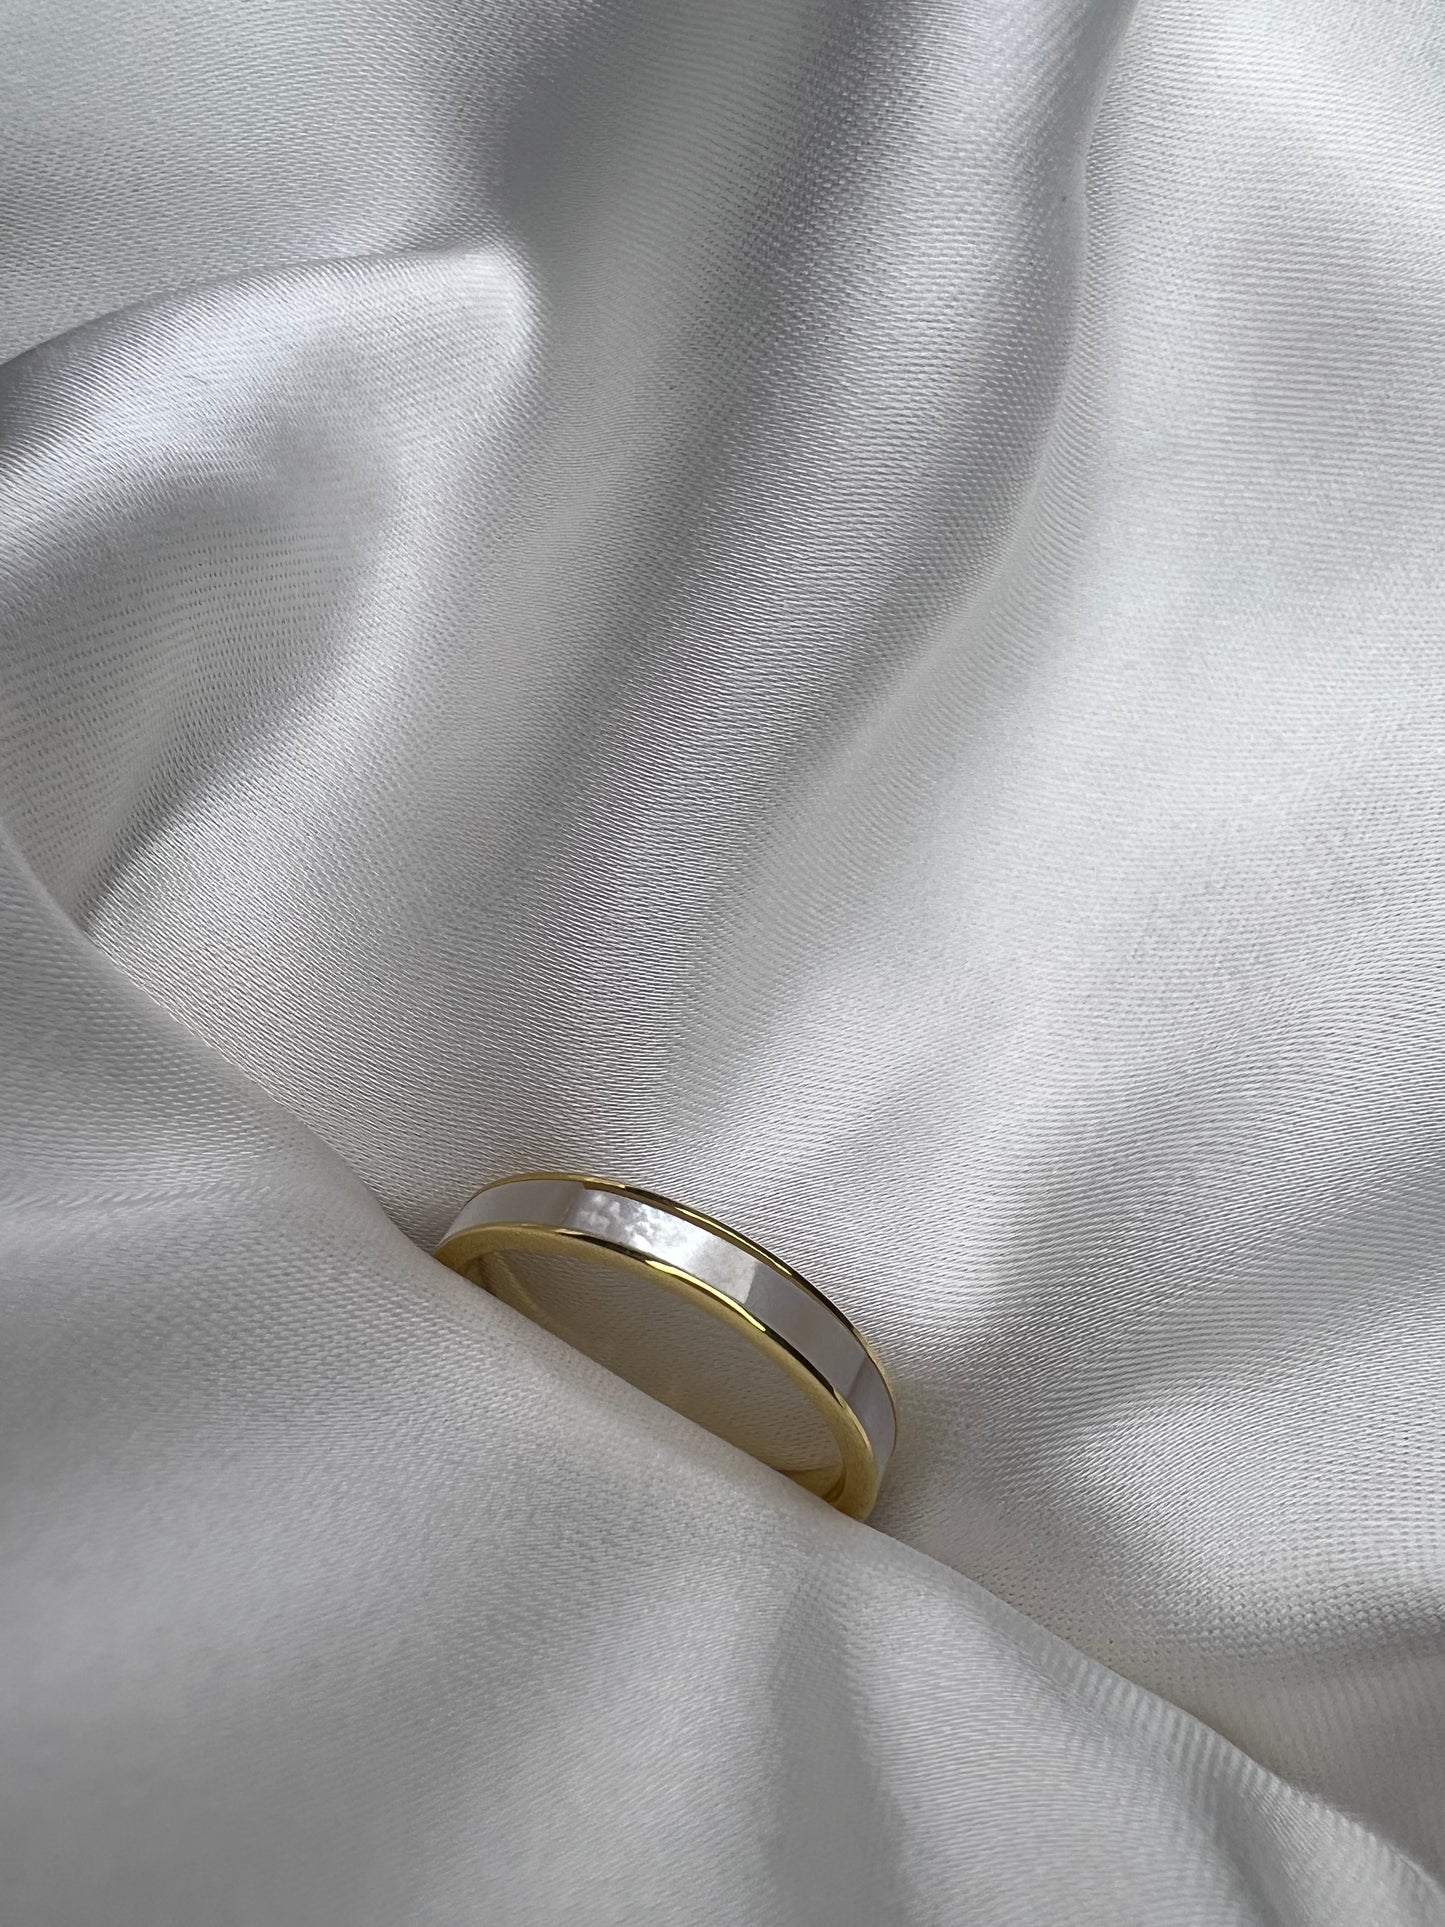 18K gold-plated 'Satin' ring with a smooth, satin-like finish, crafted from stainless steel